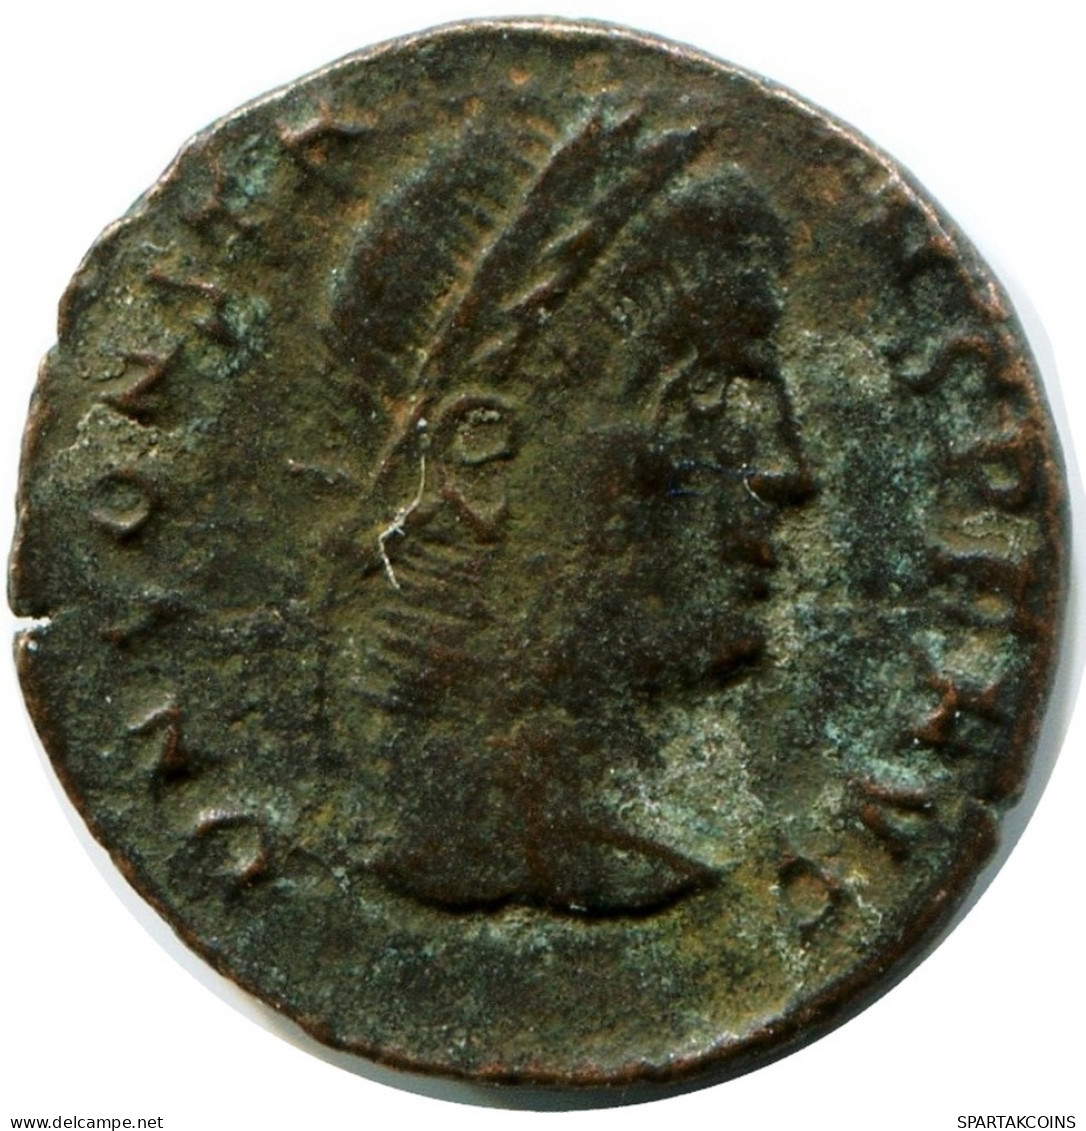 CONSTANS MINTED IN NICOMEDIA FOUND IN IHNASYAH HOARD EGYPT #ANC11724.14.D.A - El Impero Christiano (307 / 363)